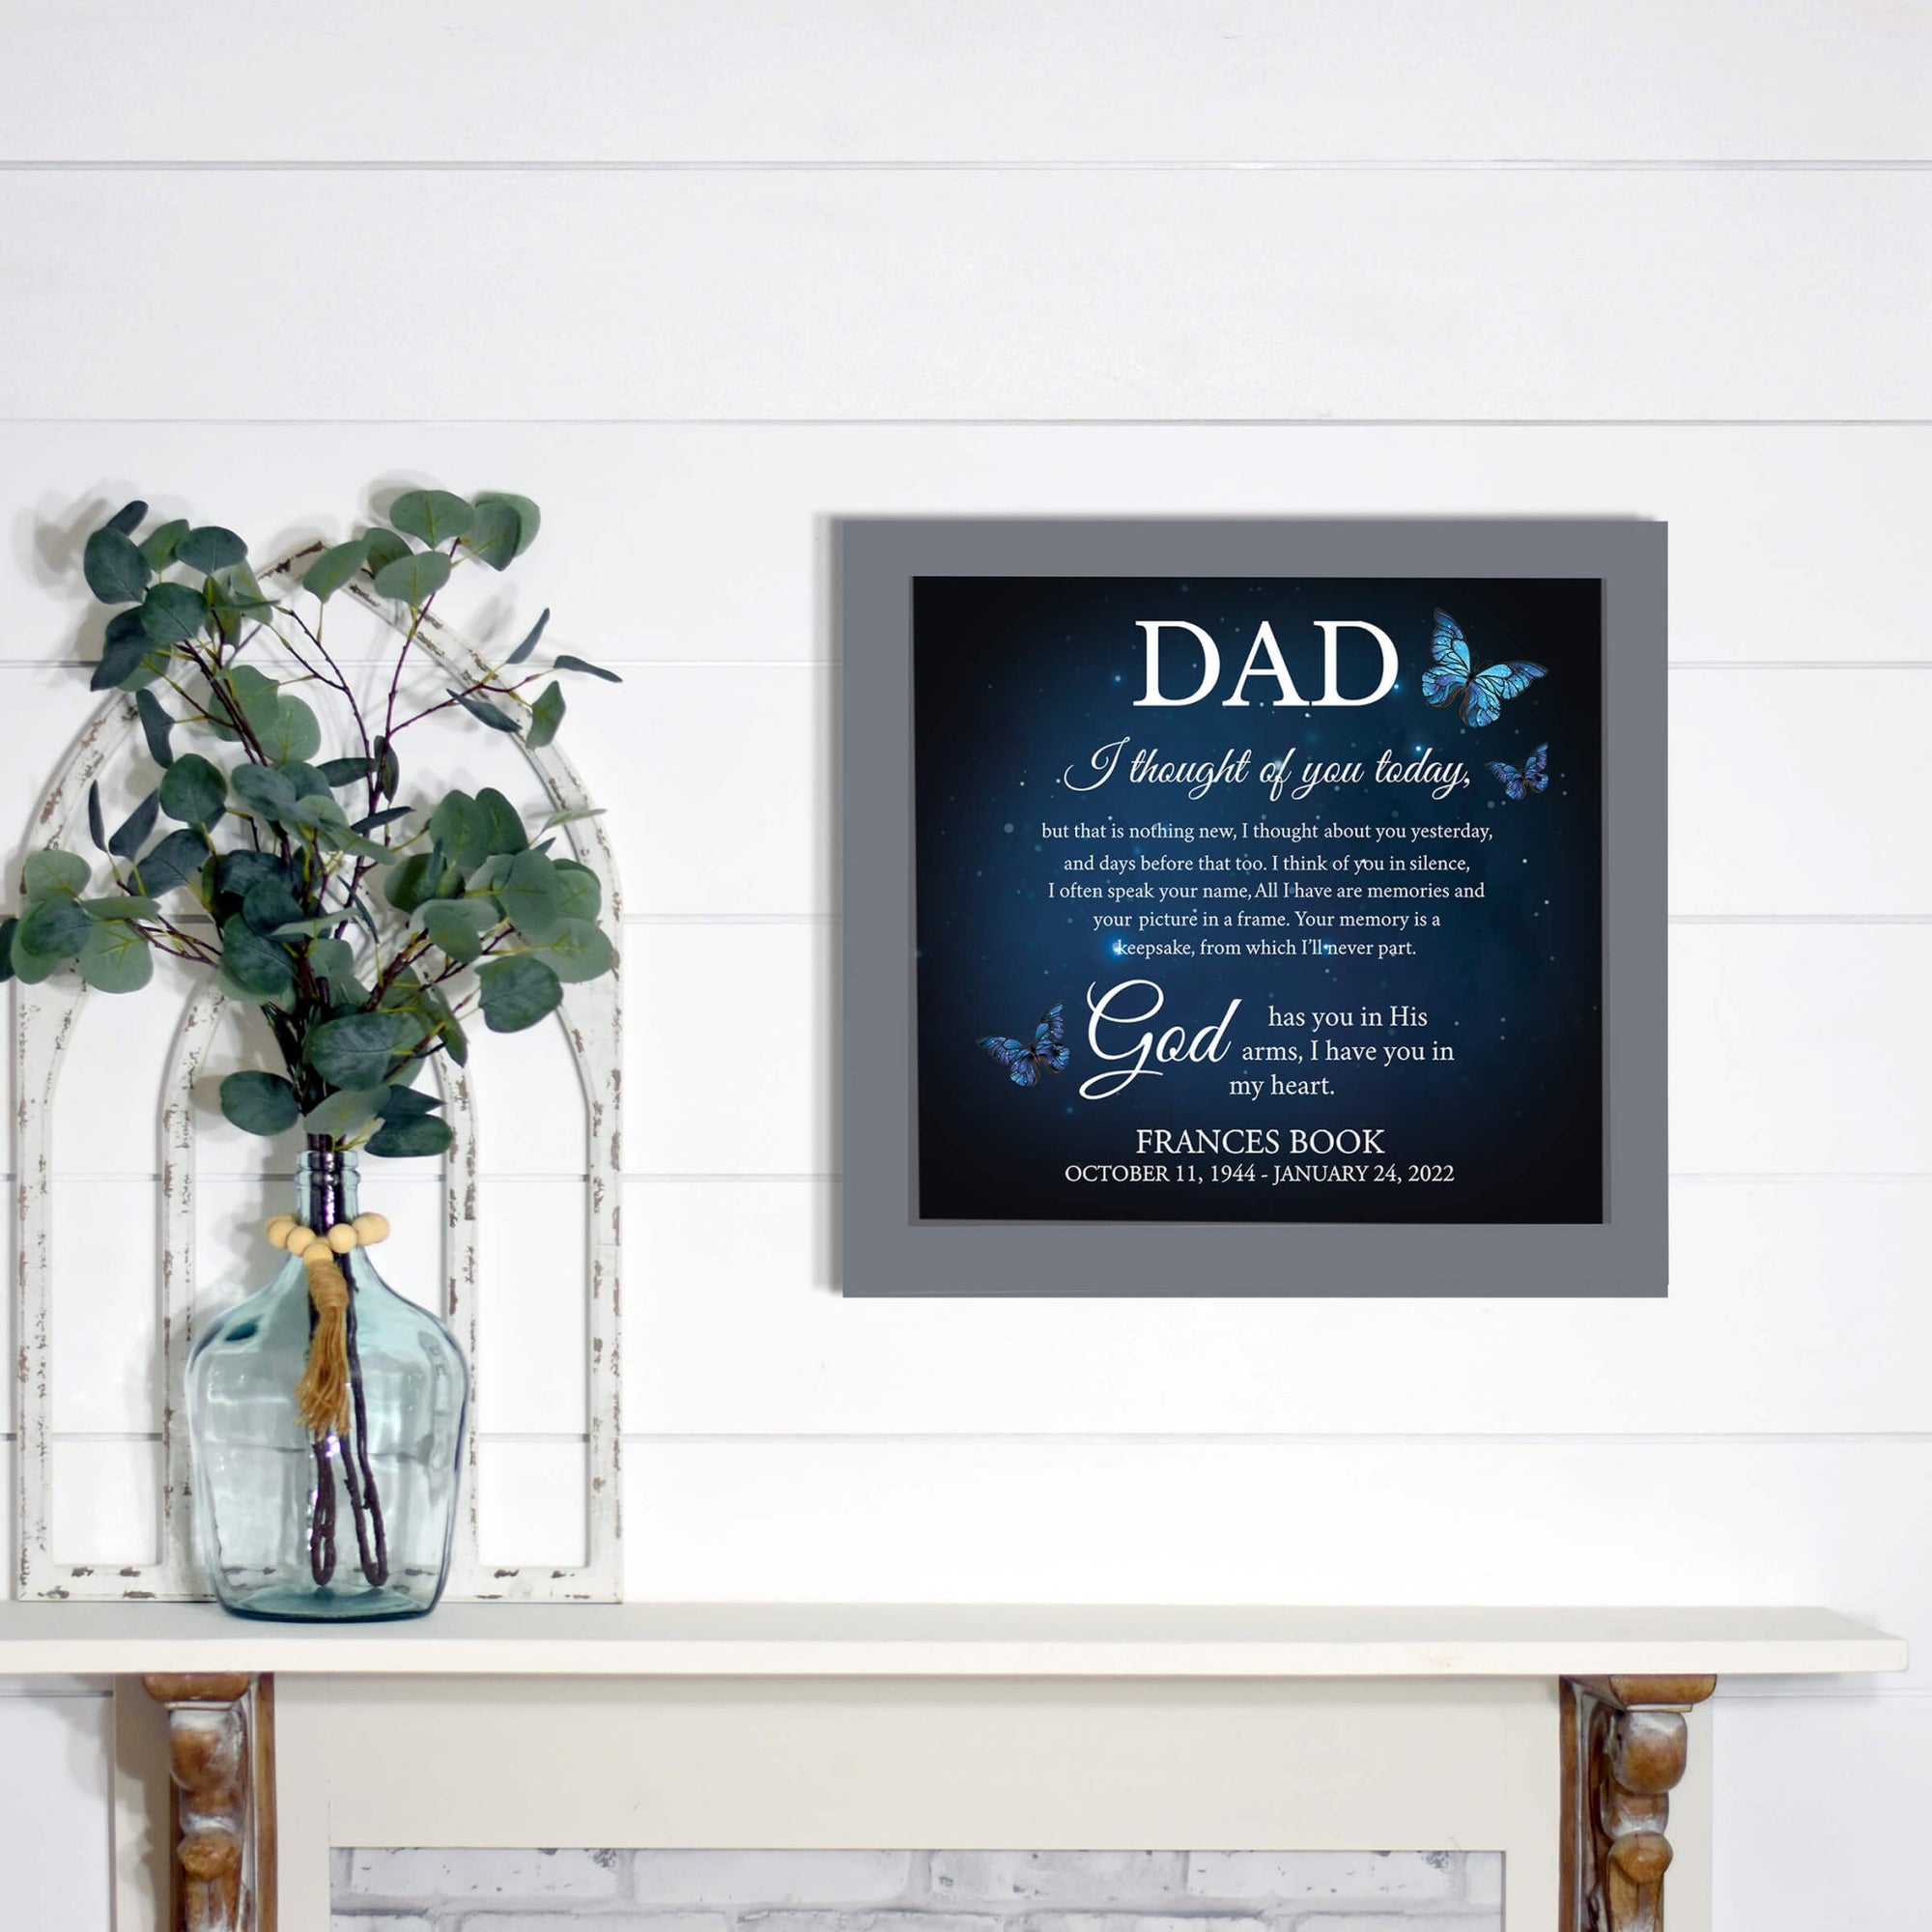 Personalized Memorial Framed Shadow Box for Loss of Loved One - I Thought Of You - LifeSong Milestones